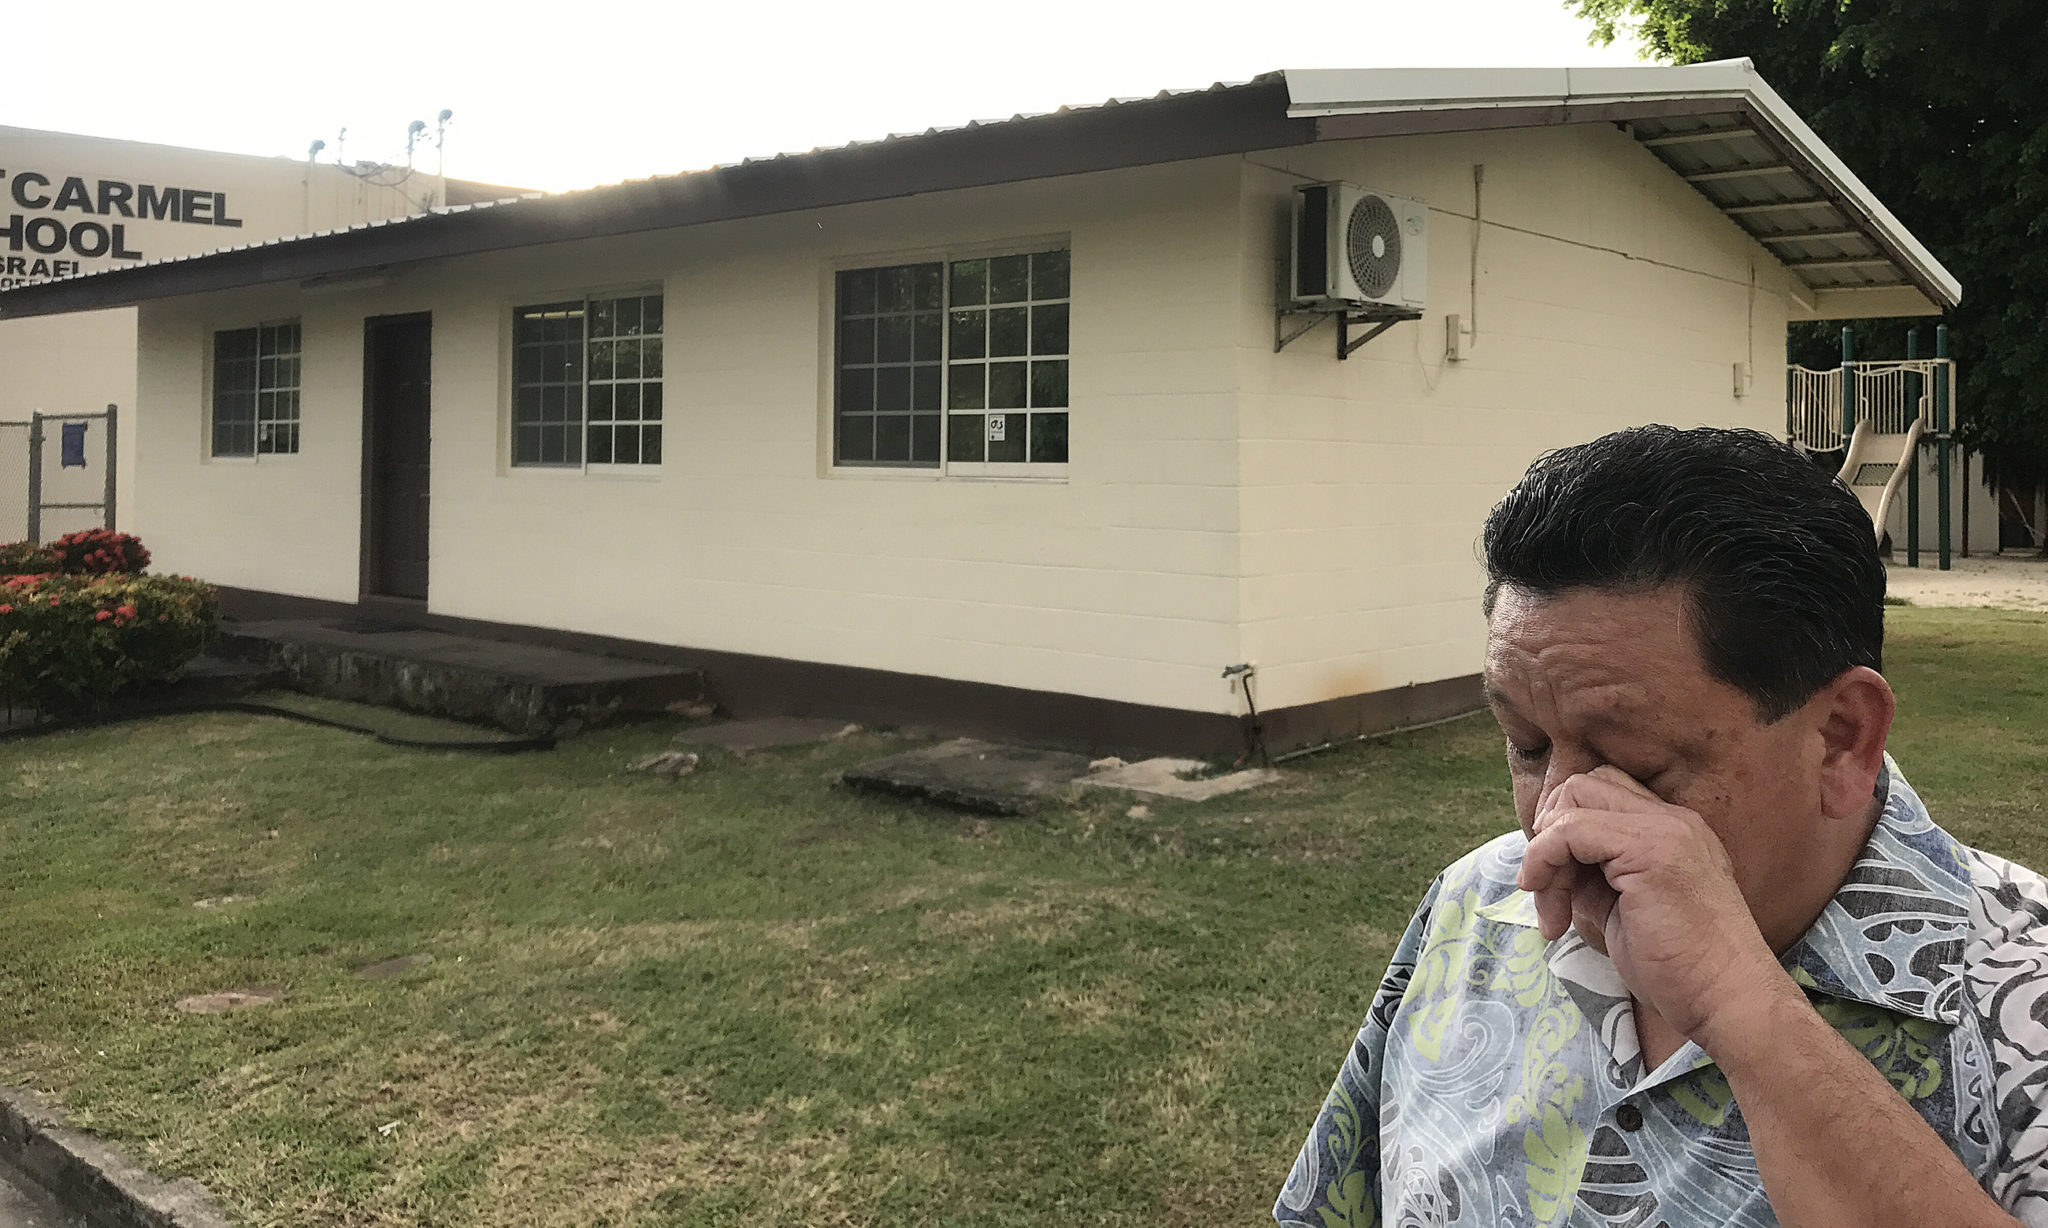 Former Agat, Guam altar boy Roland Paul L Sondia wipes away tears while standing near Father Apuron’s priest quarters in Agat, Guam. Sondia was about 12-years when he alleged he was invited into now Archbishop Apuron’s room in the evening and sexually abused.